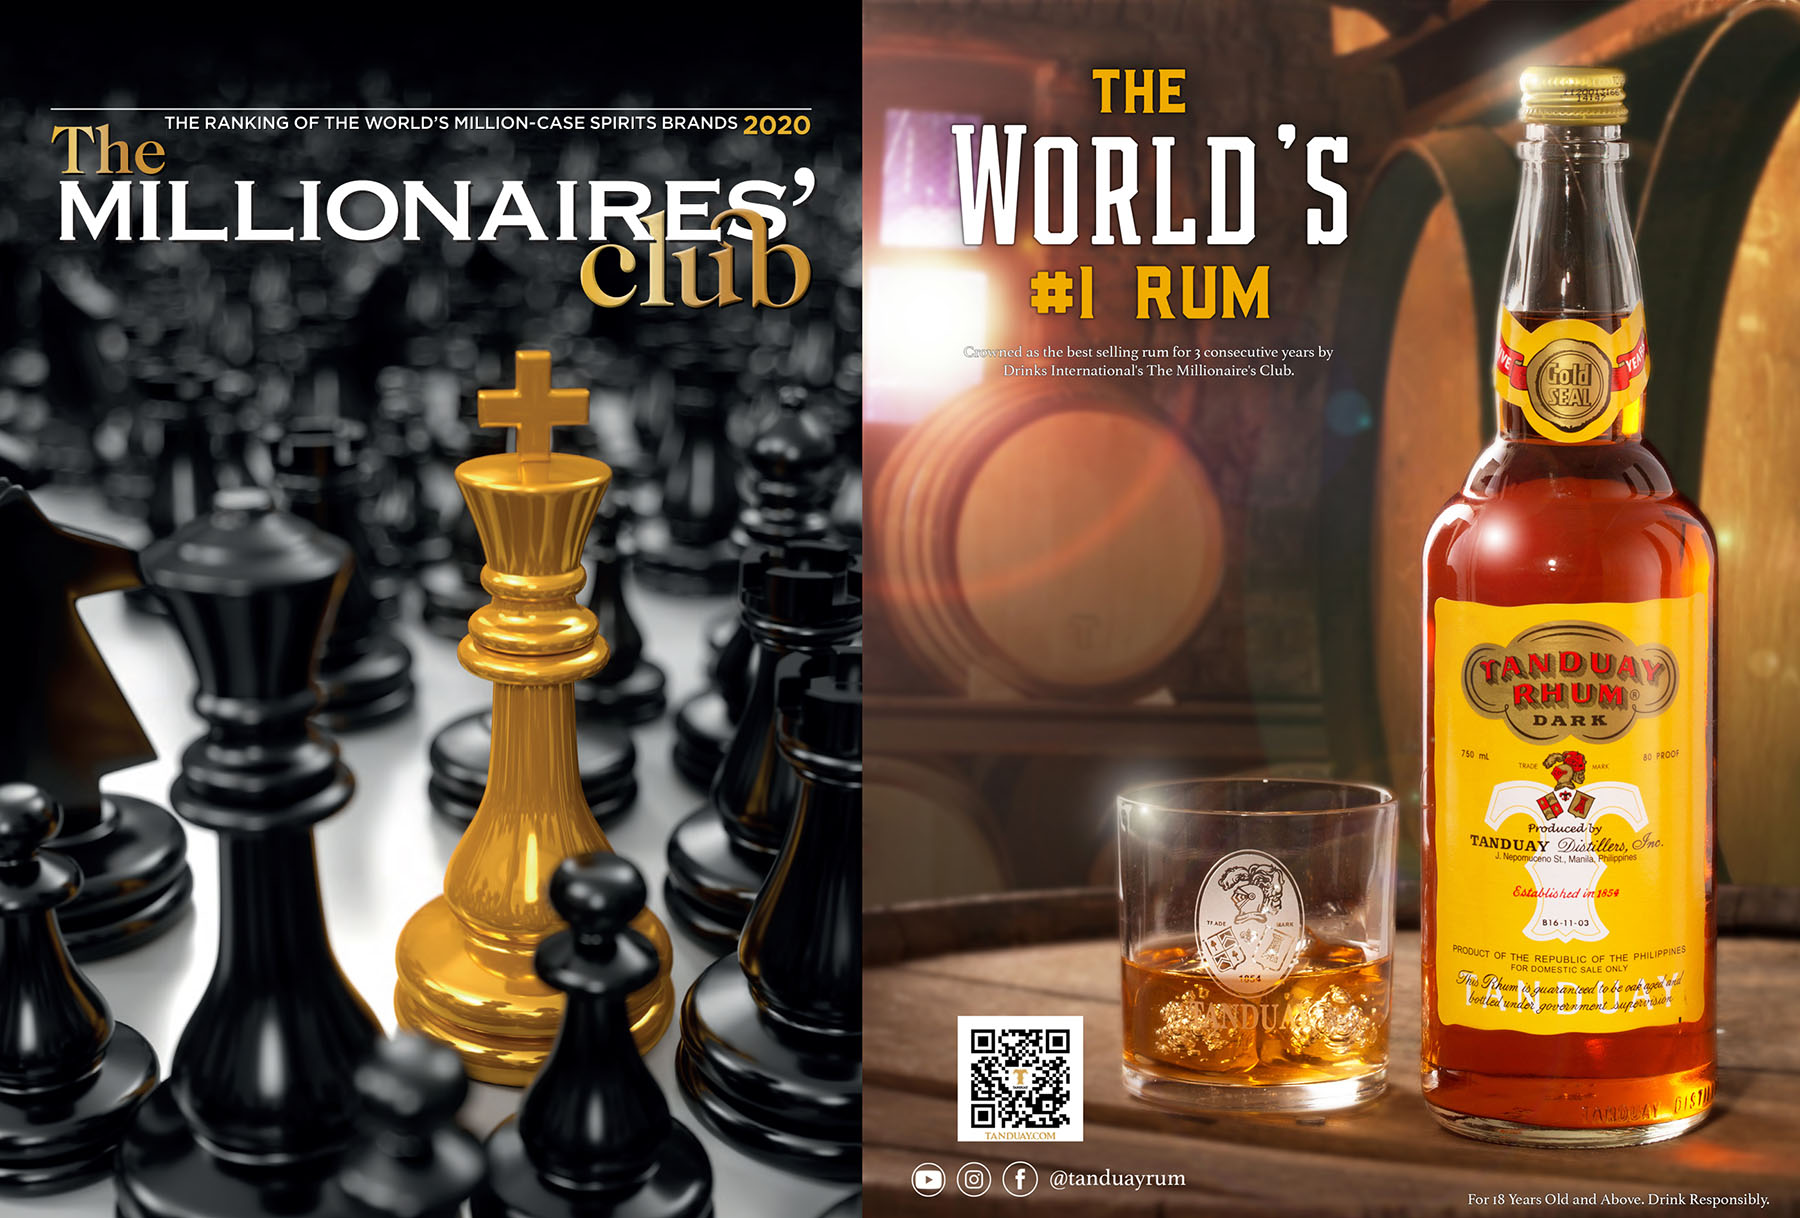 Tanduay Rhum gains Number 1 Spot attributes success to international partnerships and aggressive expansion